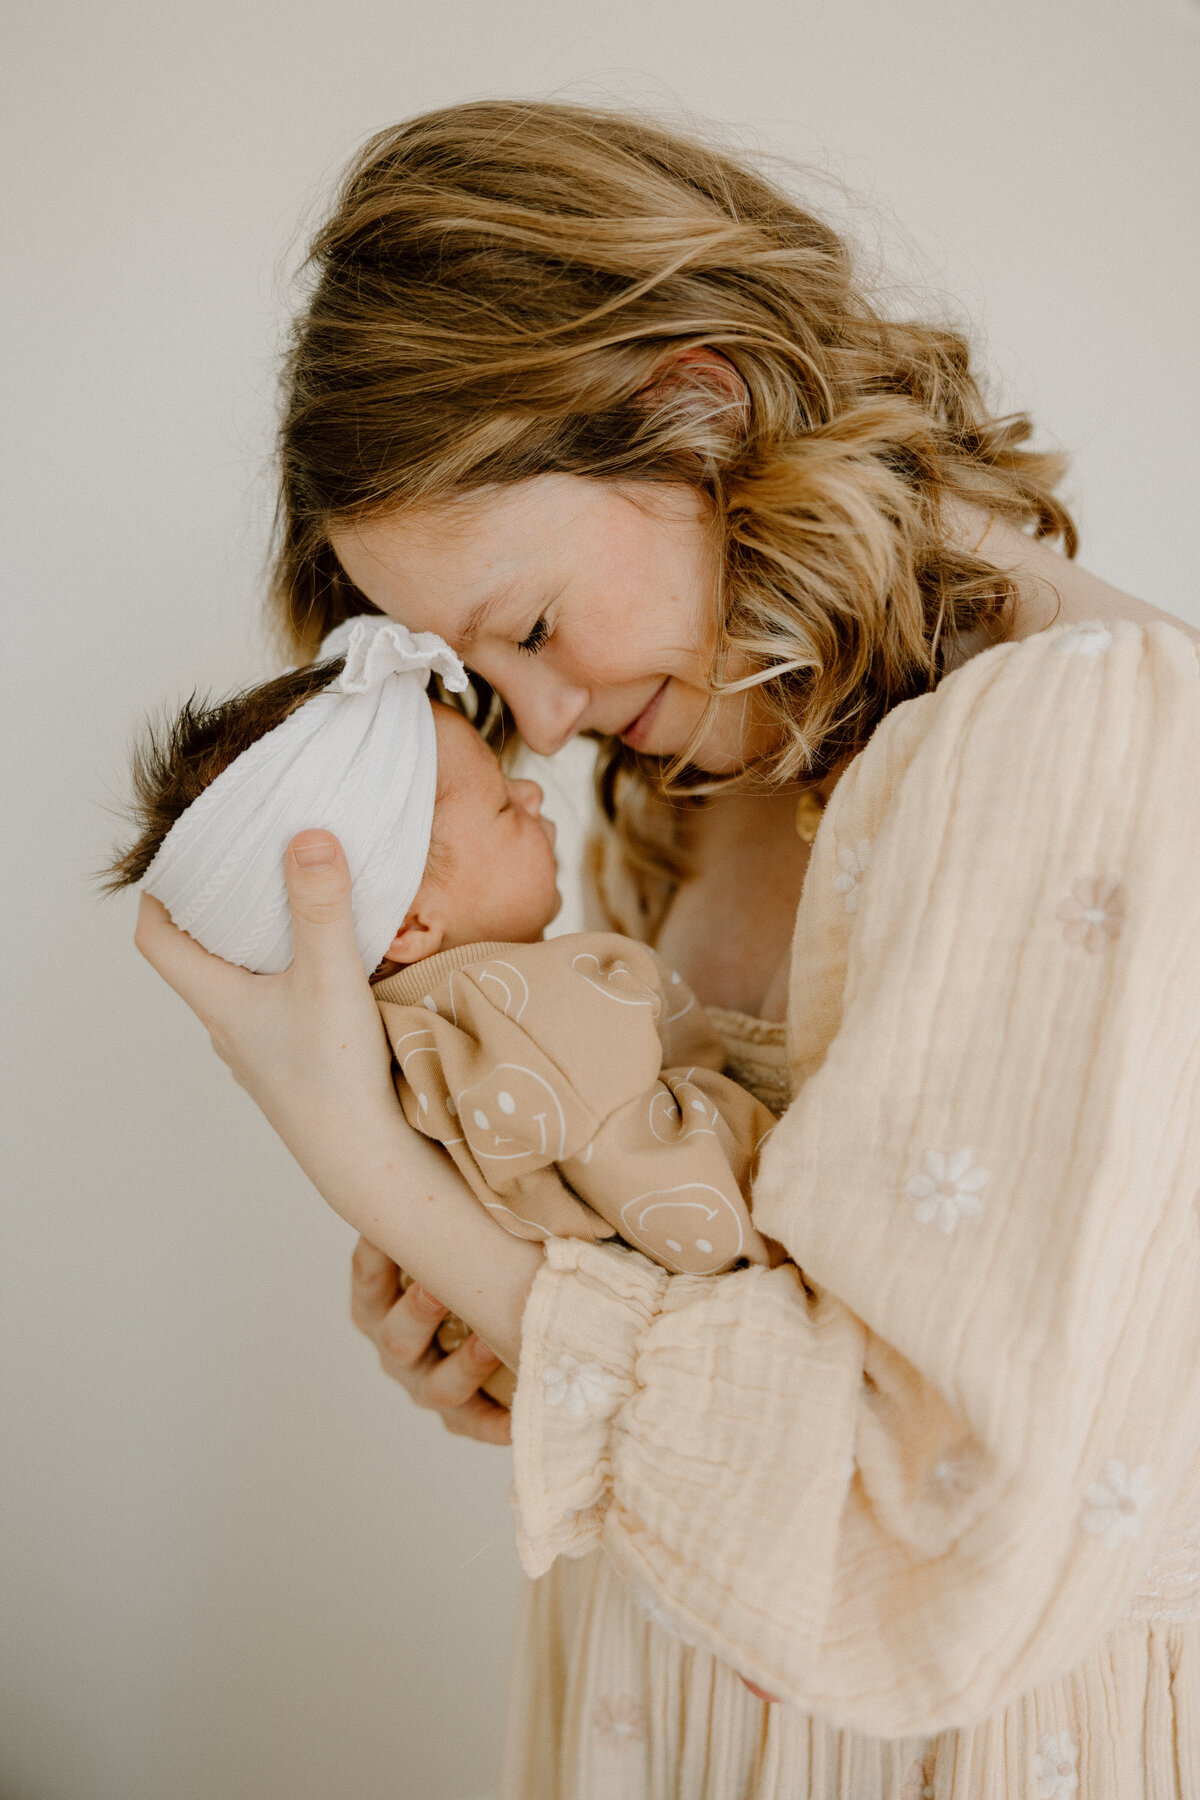 in-home-newborn-lifestyle-session-lancaster-pa-cara-marie-photography-29